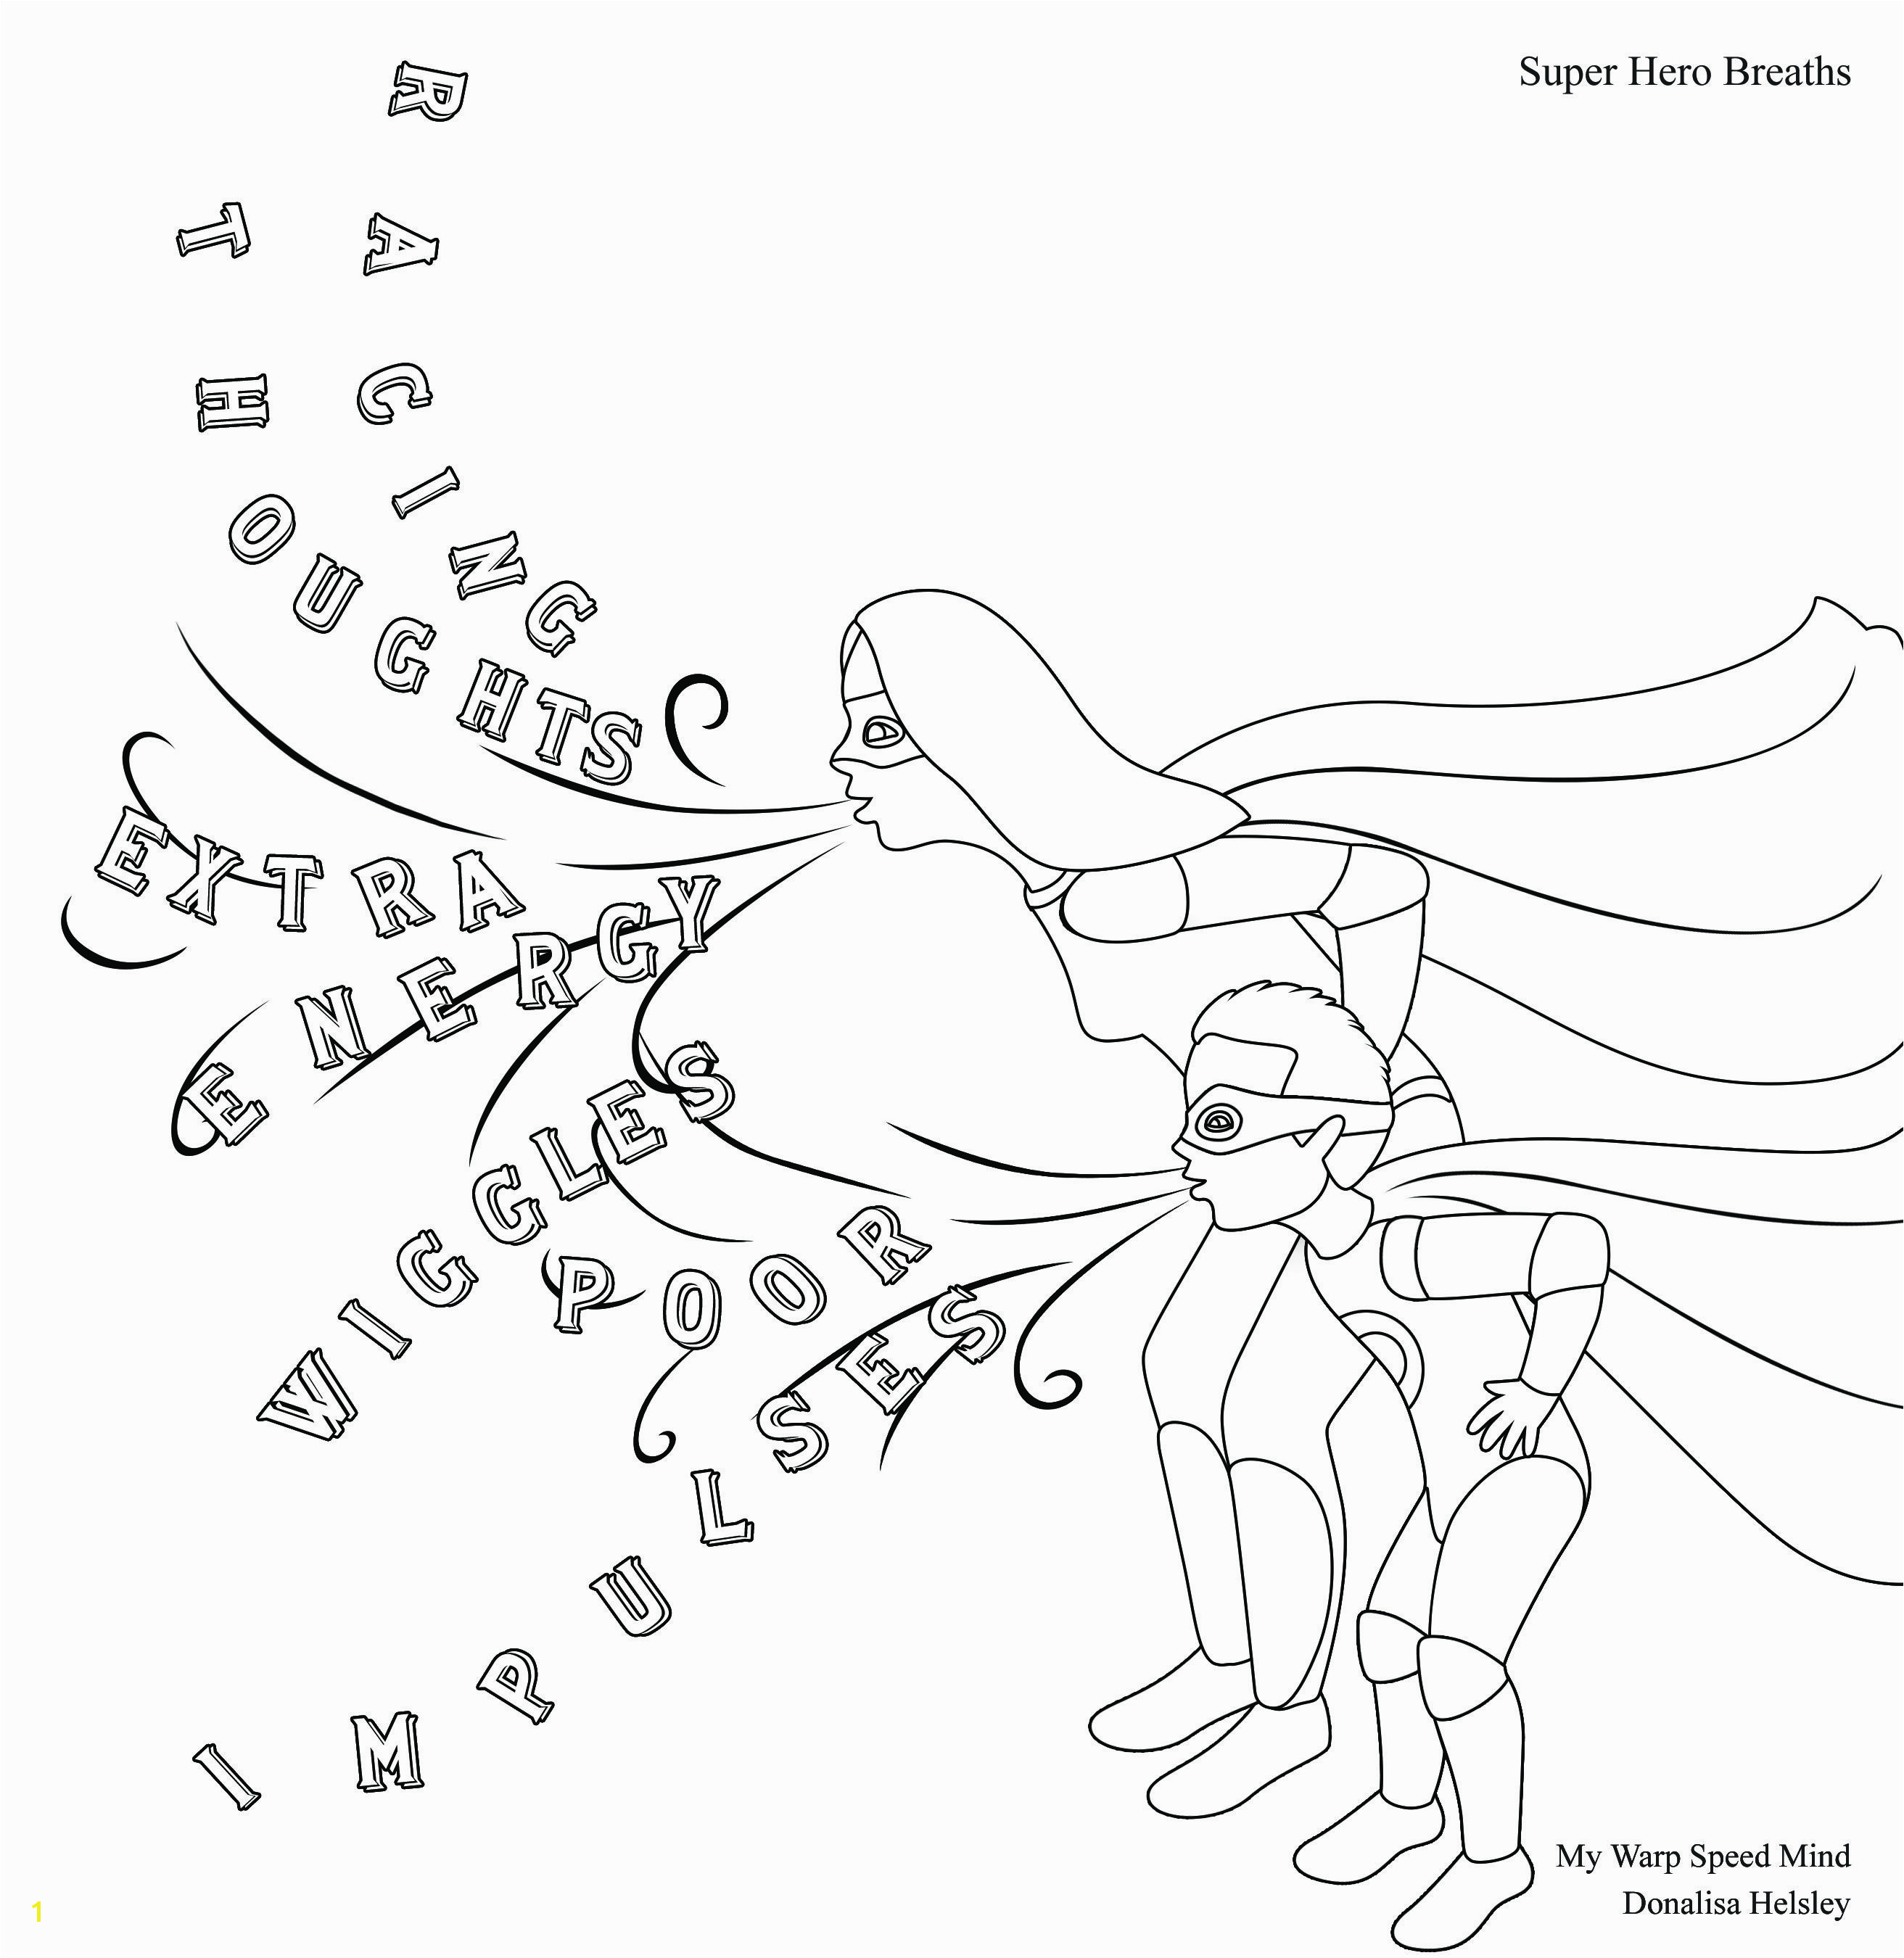 4 coloring sheets that you can use when working with a client with ADHD or impulse control issues are from the book "My Warp Speed Mind" by